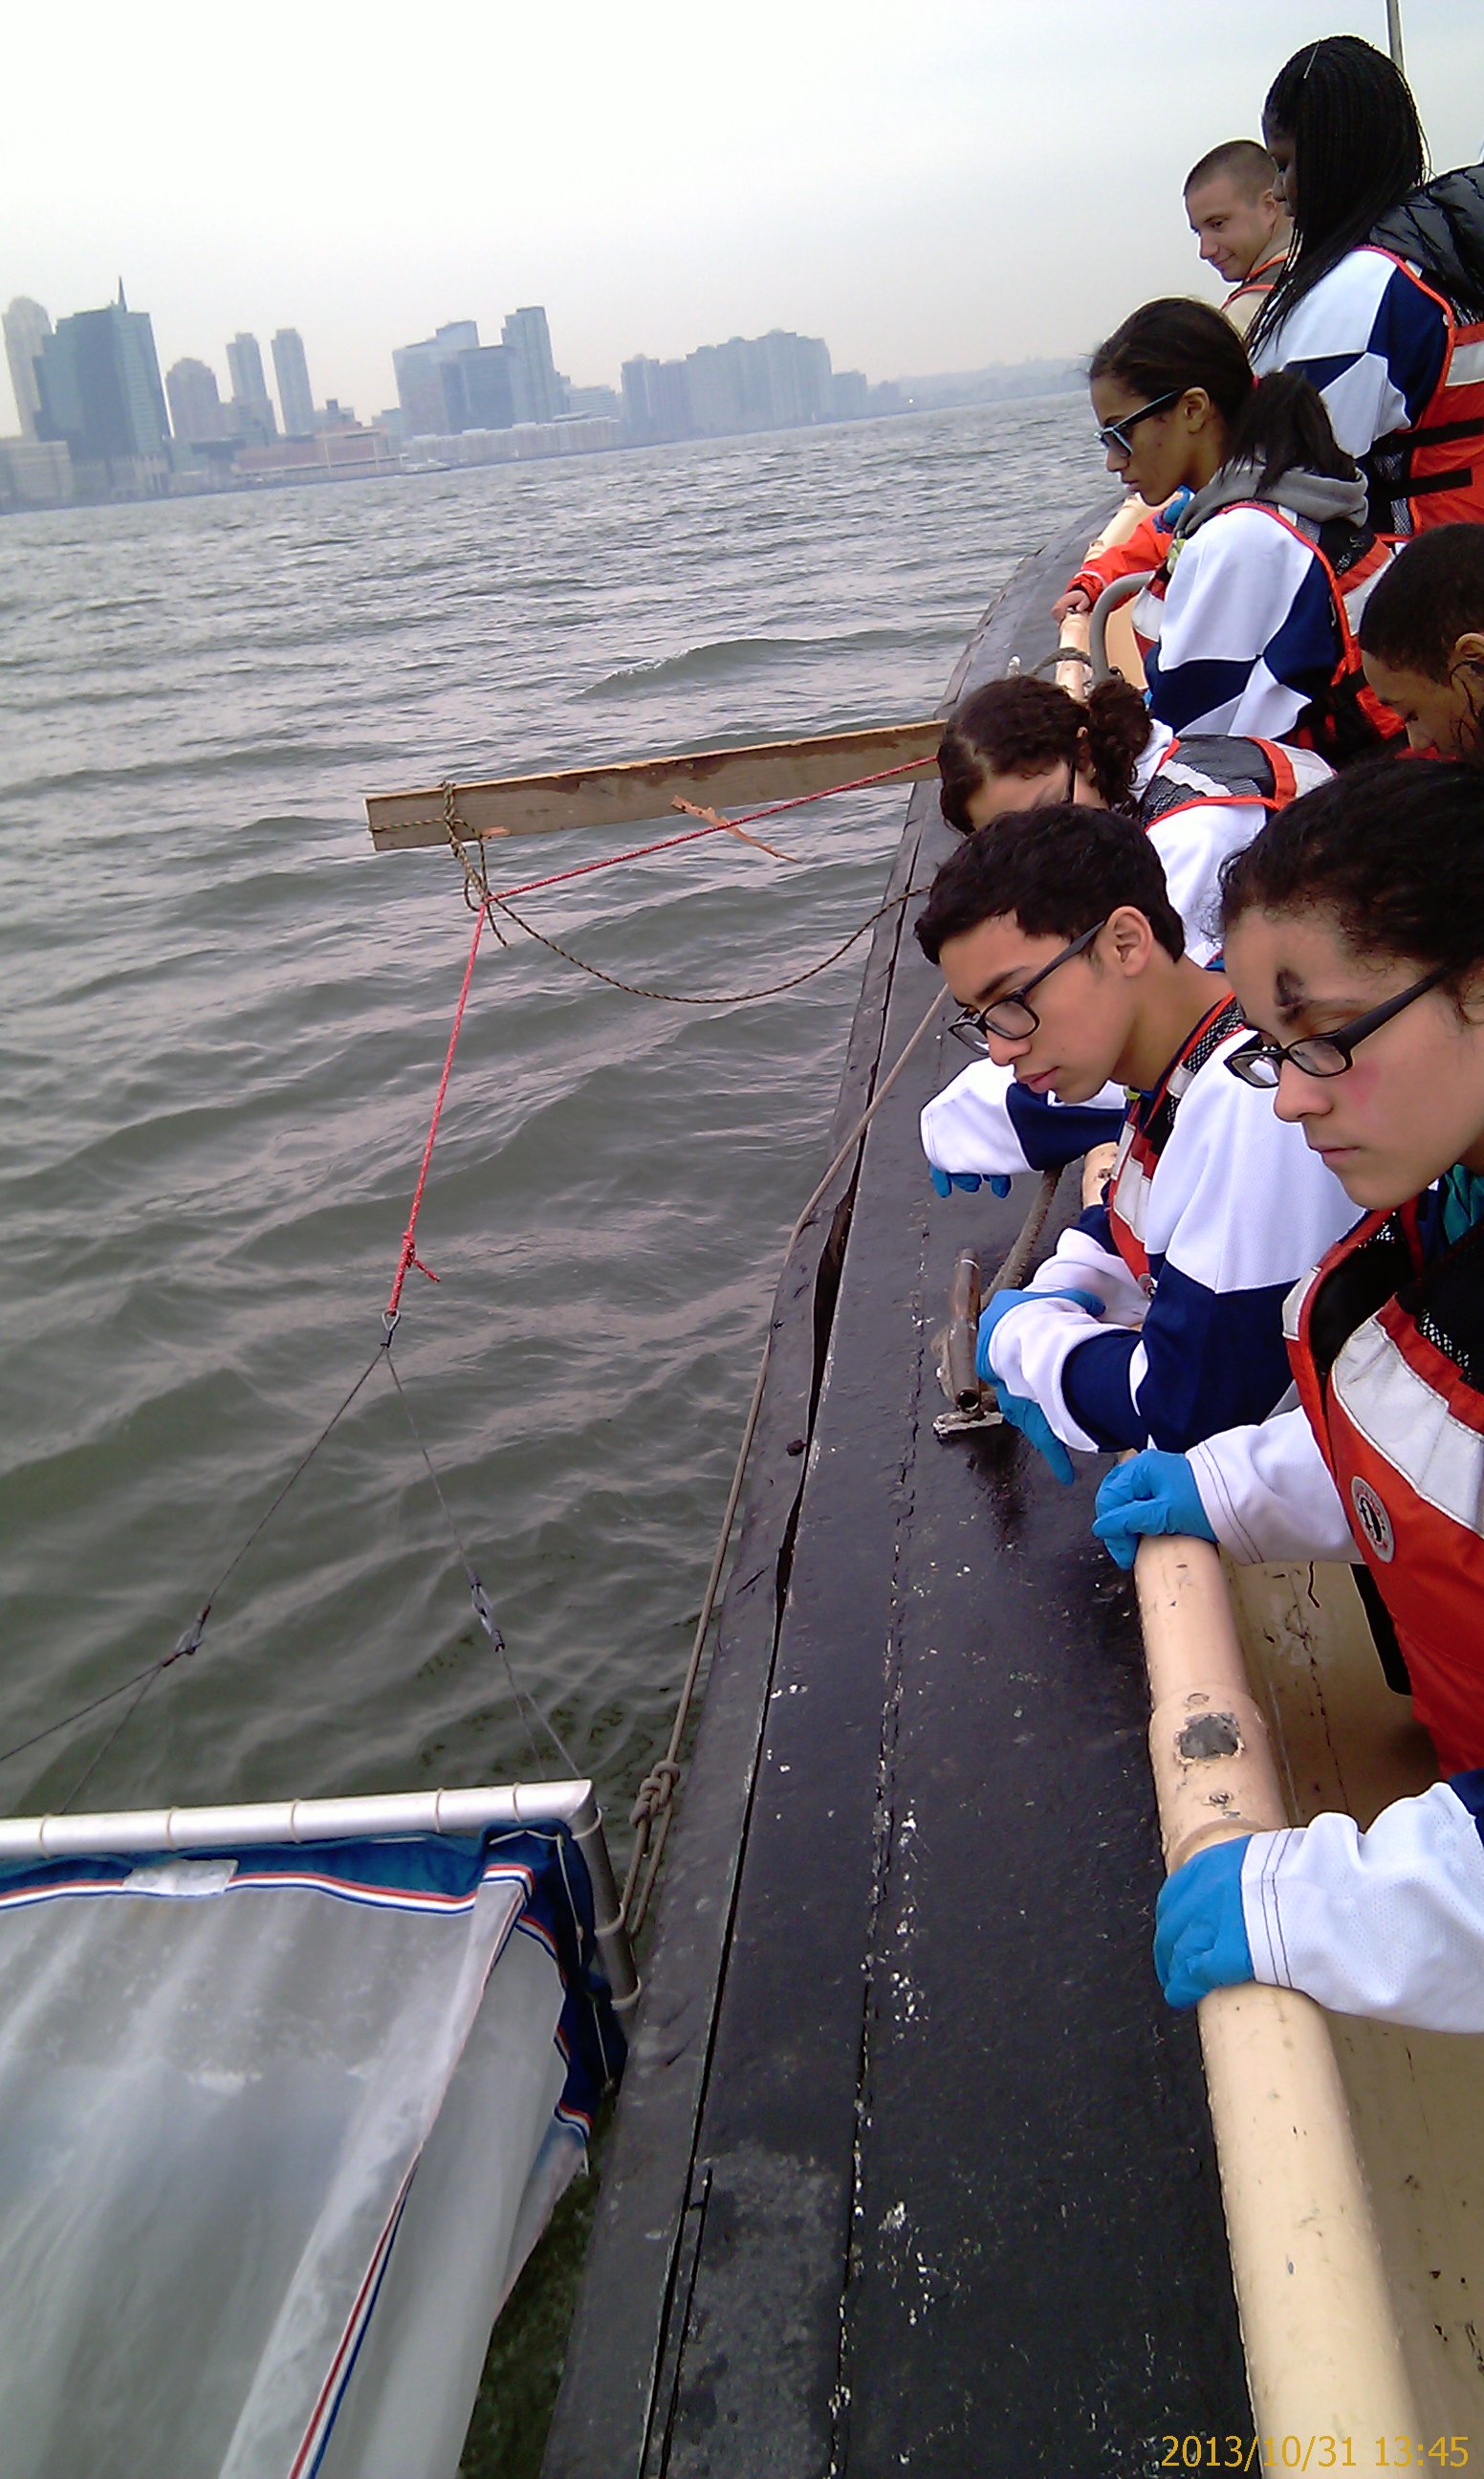 On October 31st, our research scholars teamed up with Rachael of the Rozalia Project to monitor microplastics in the Hudson River Estuary.